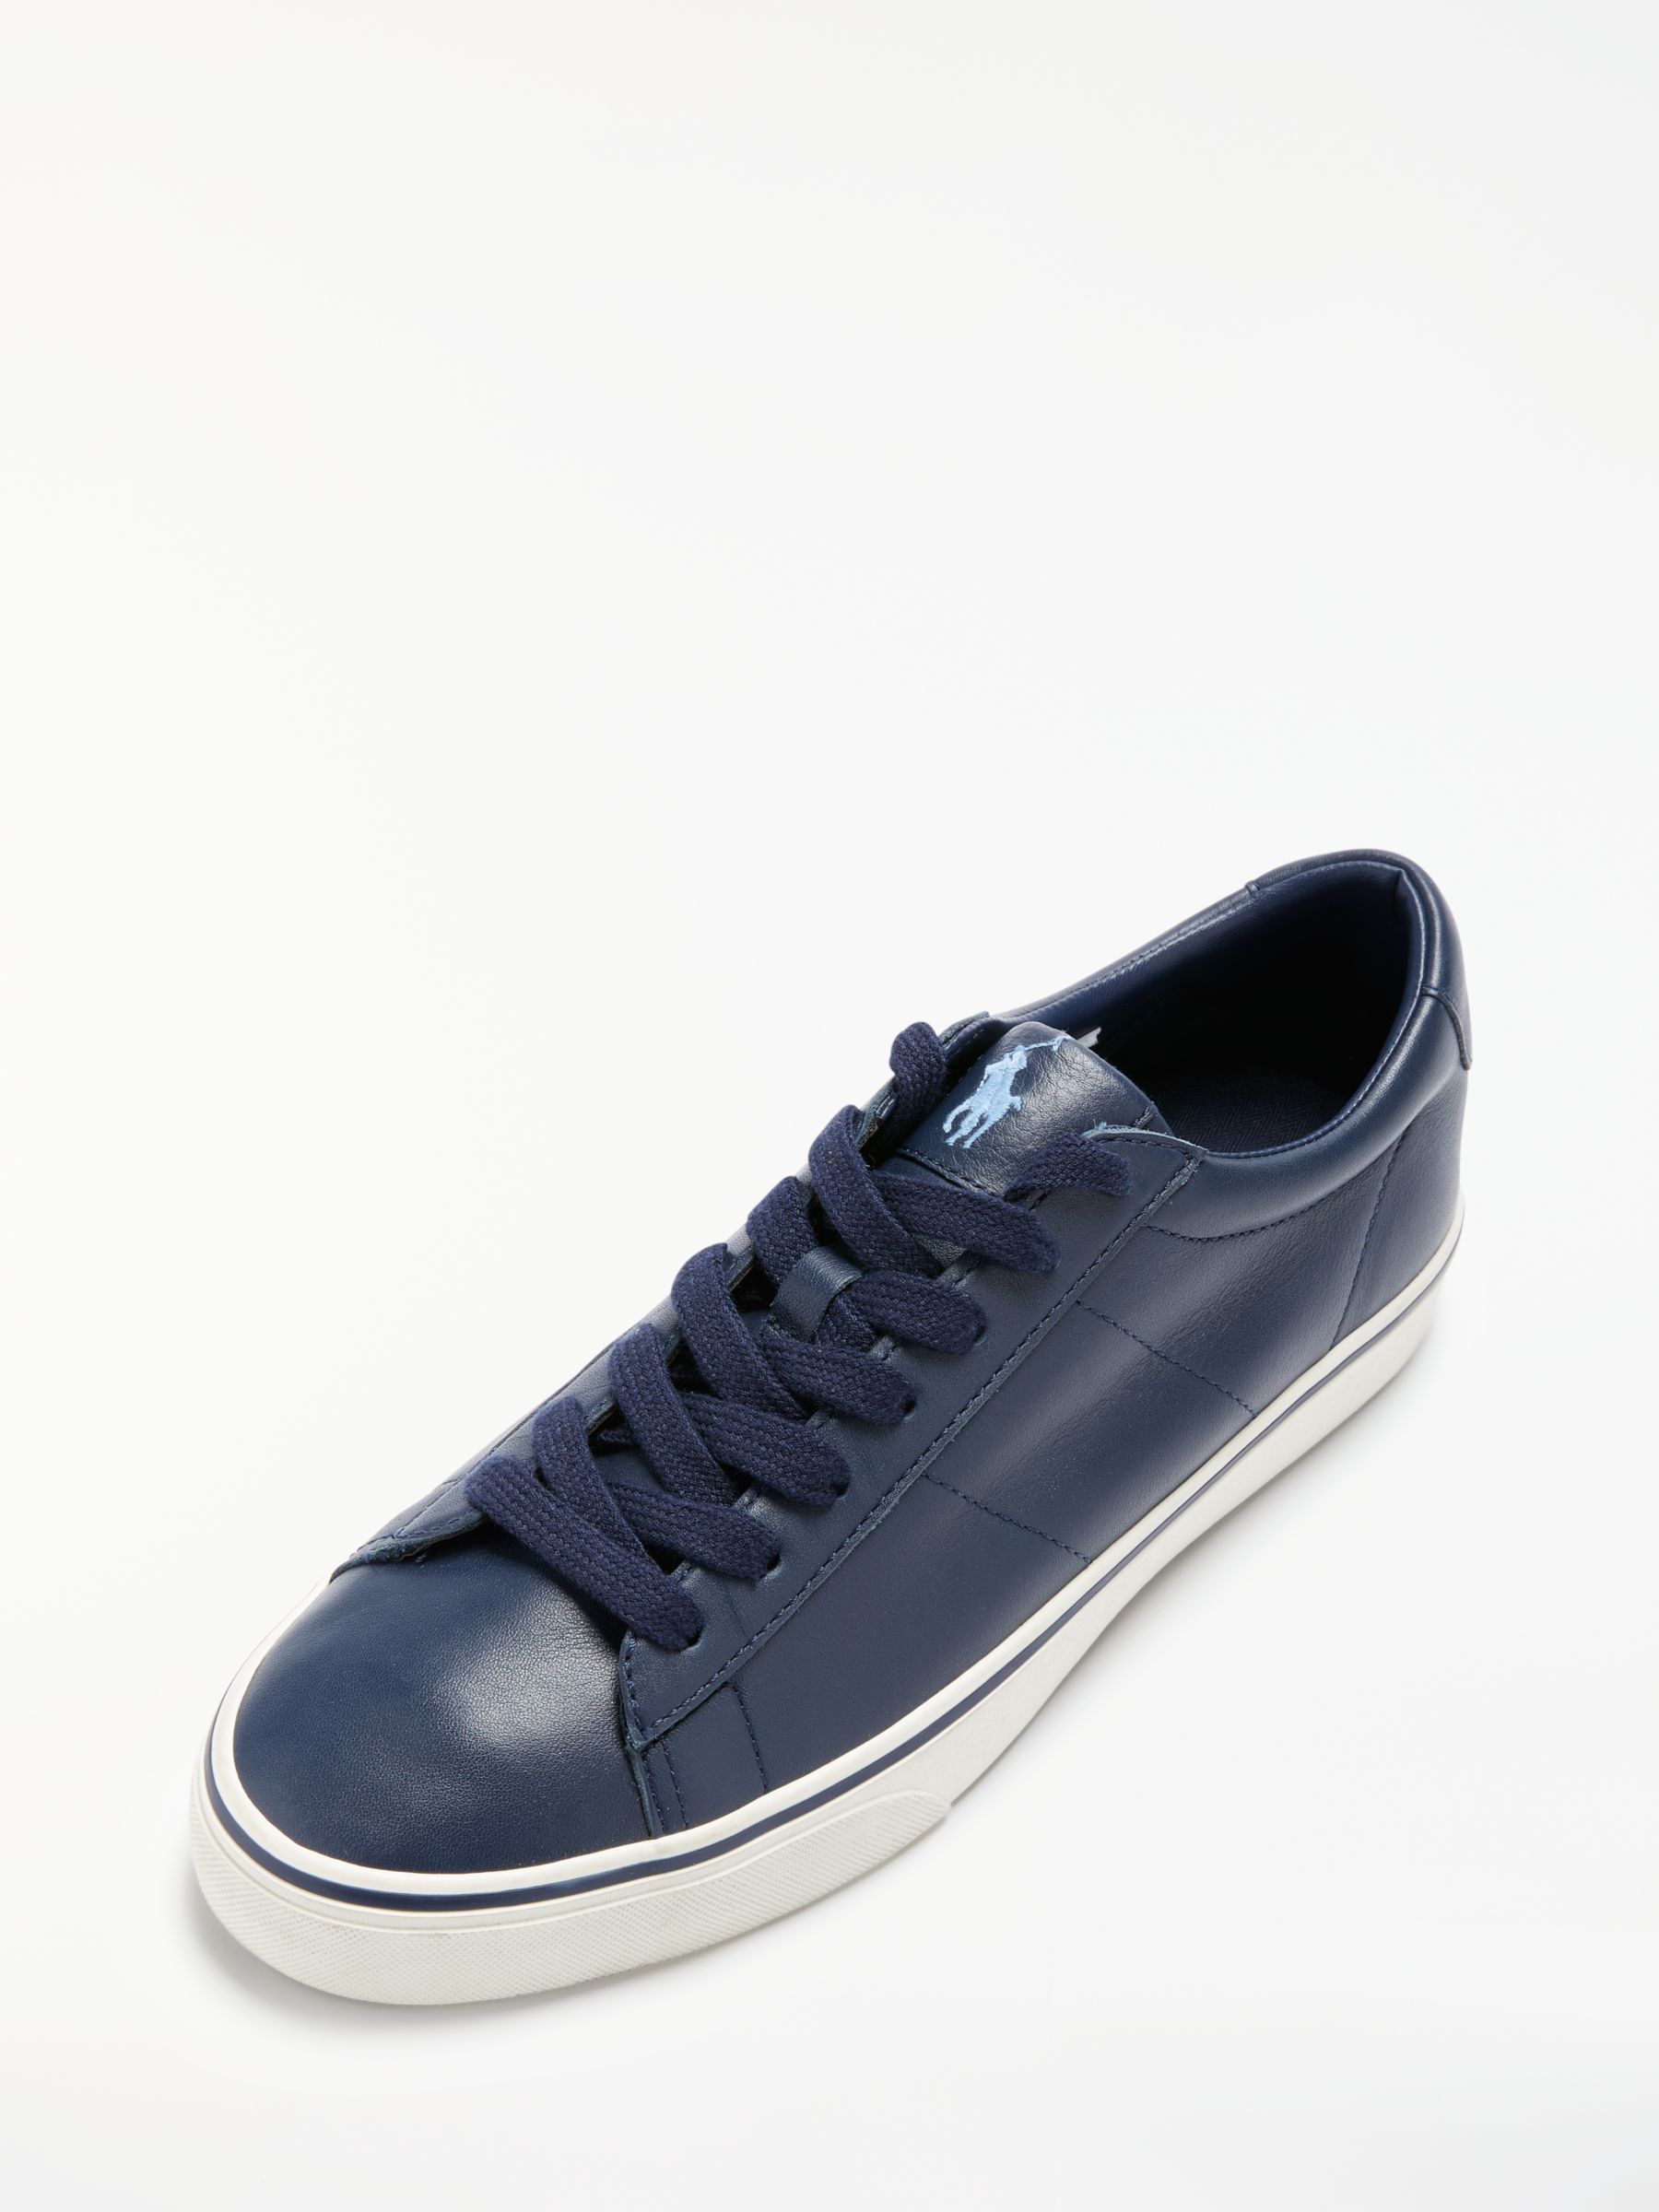 Polo Ralph Lauren Sayer Trainers at 